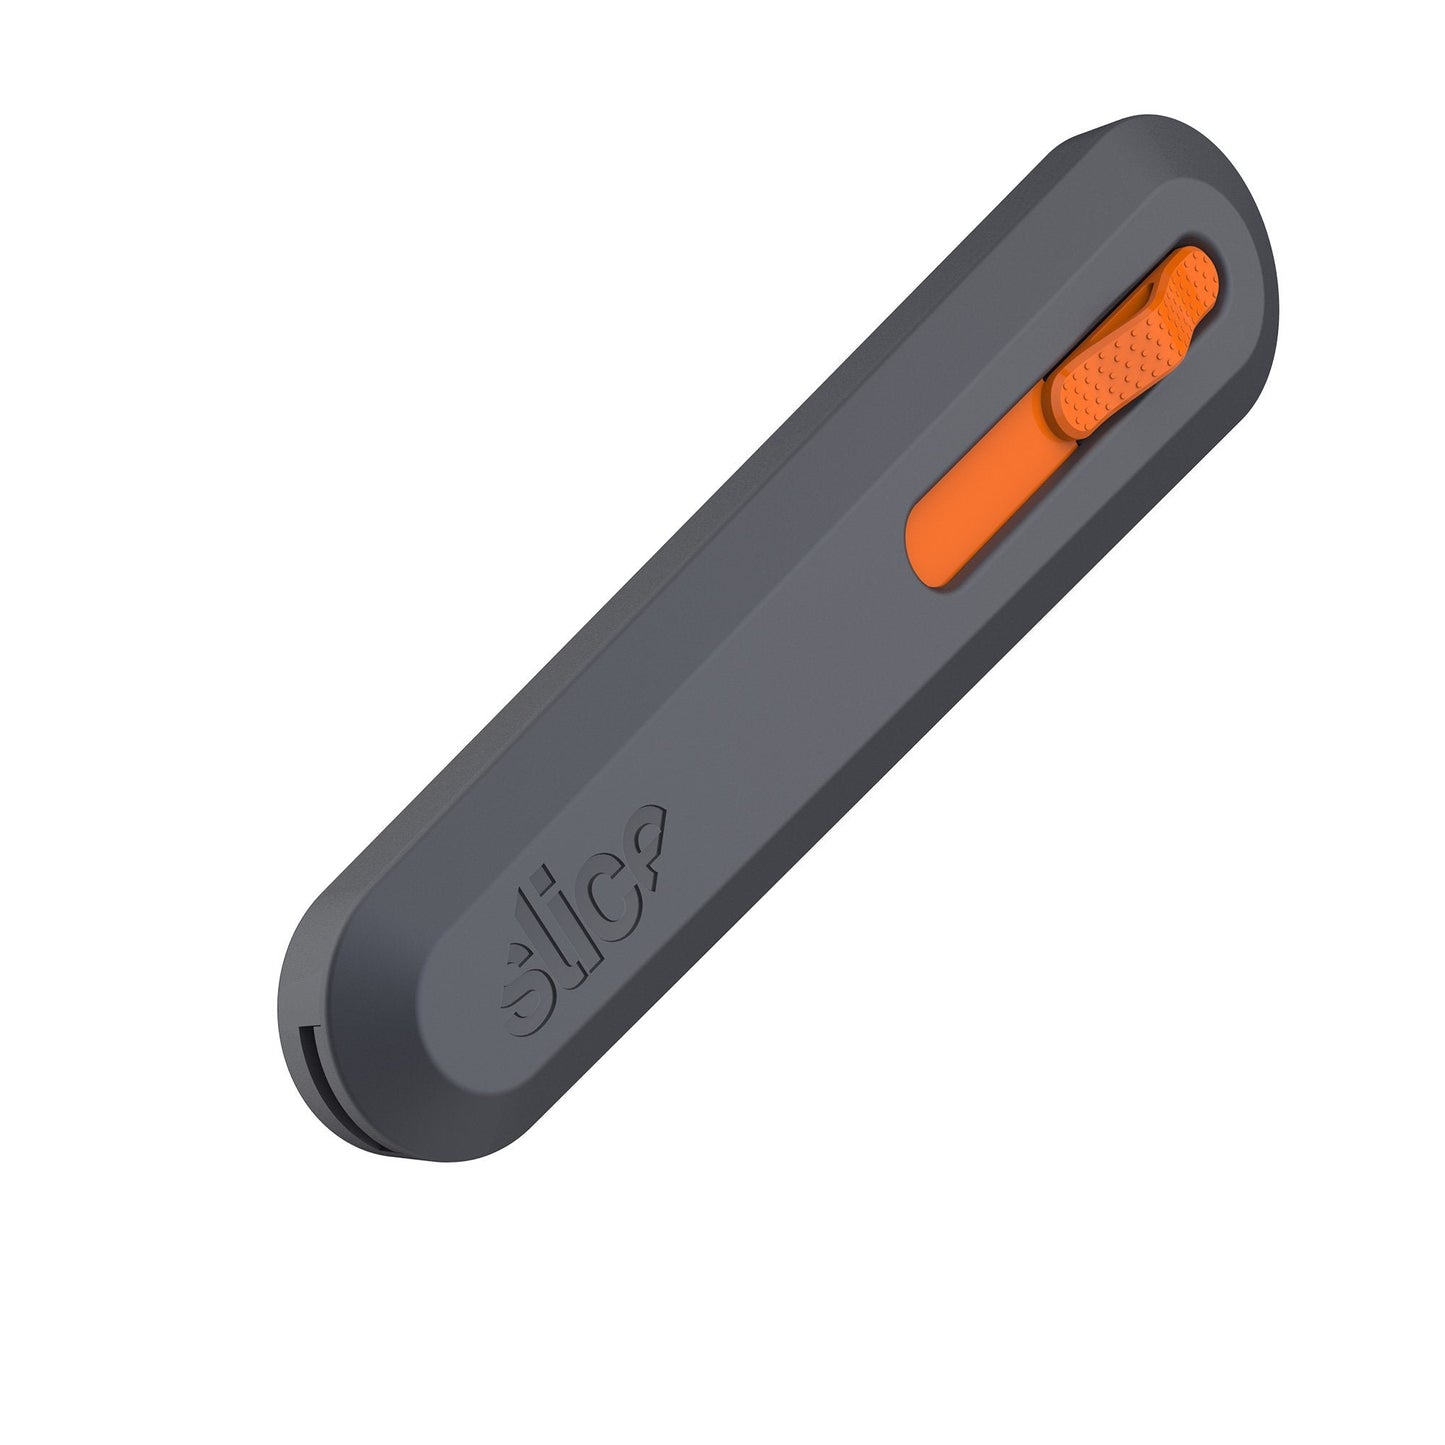 The Slice 10550 Manual Utility Knife with ceramic safety blade